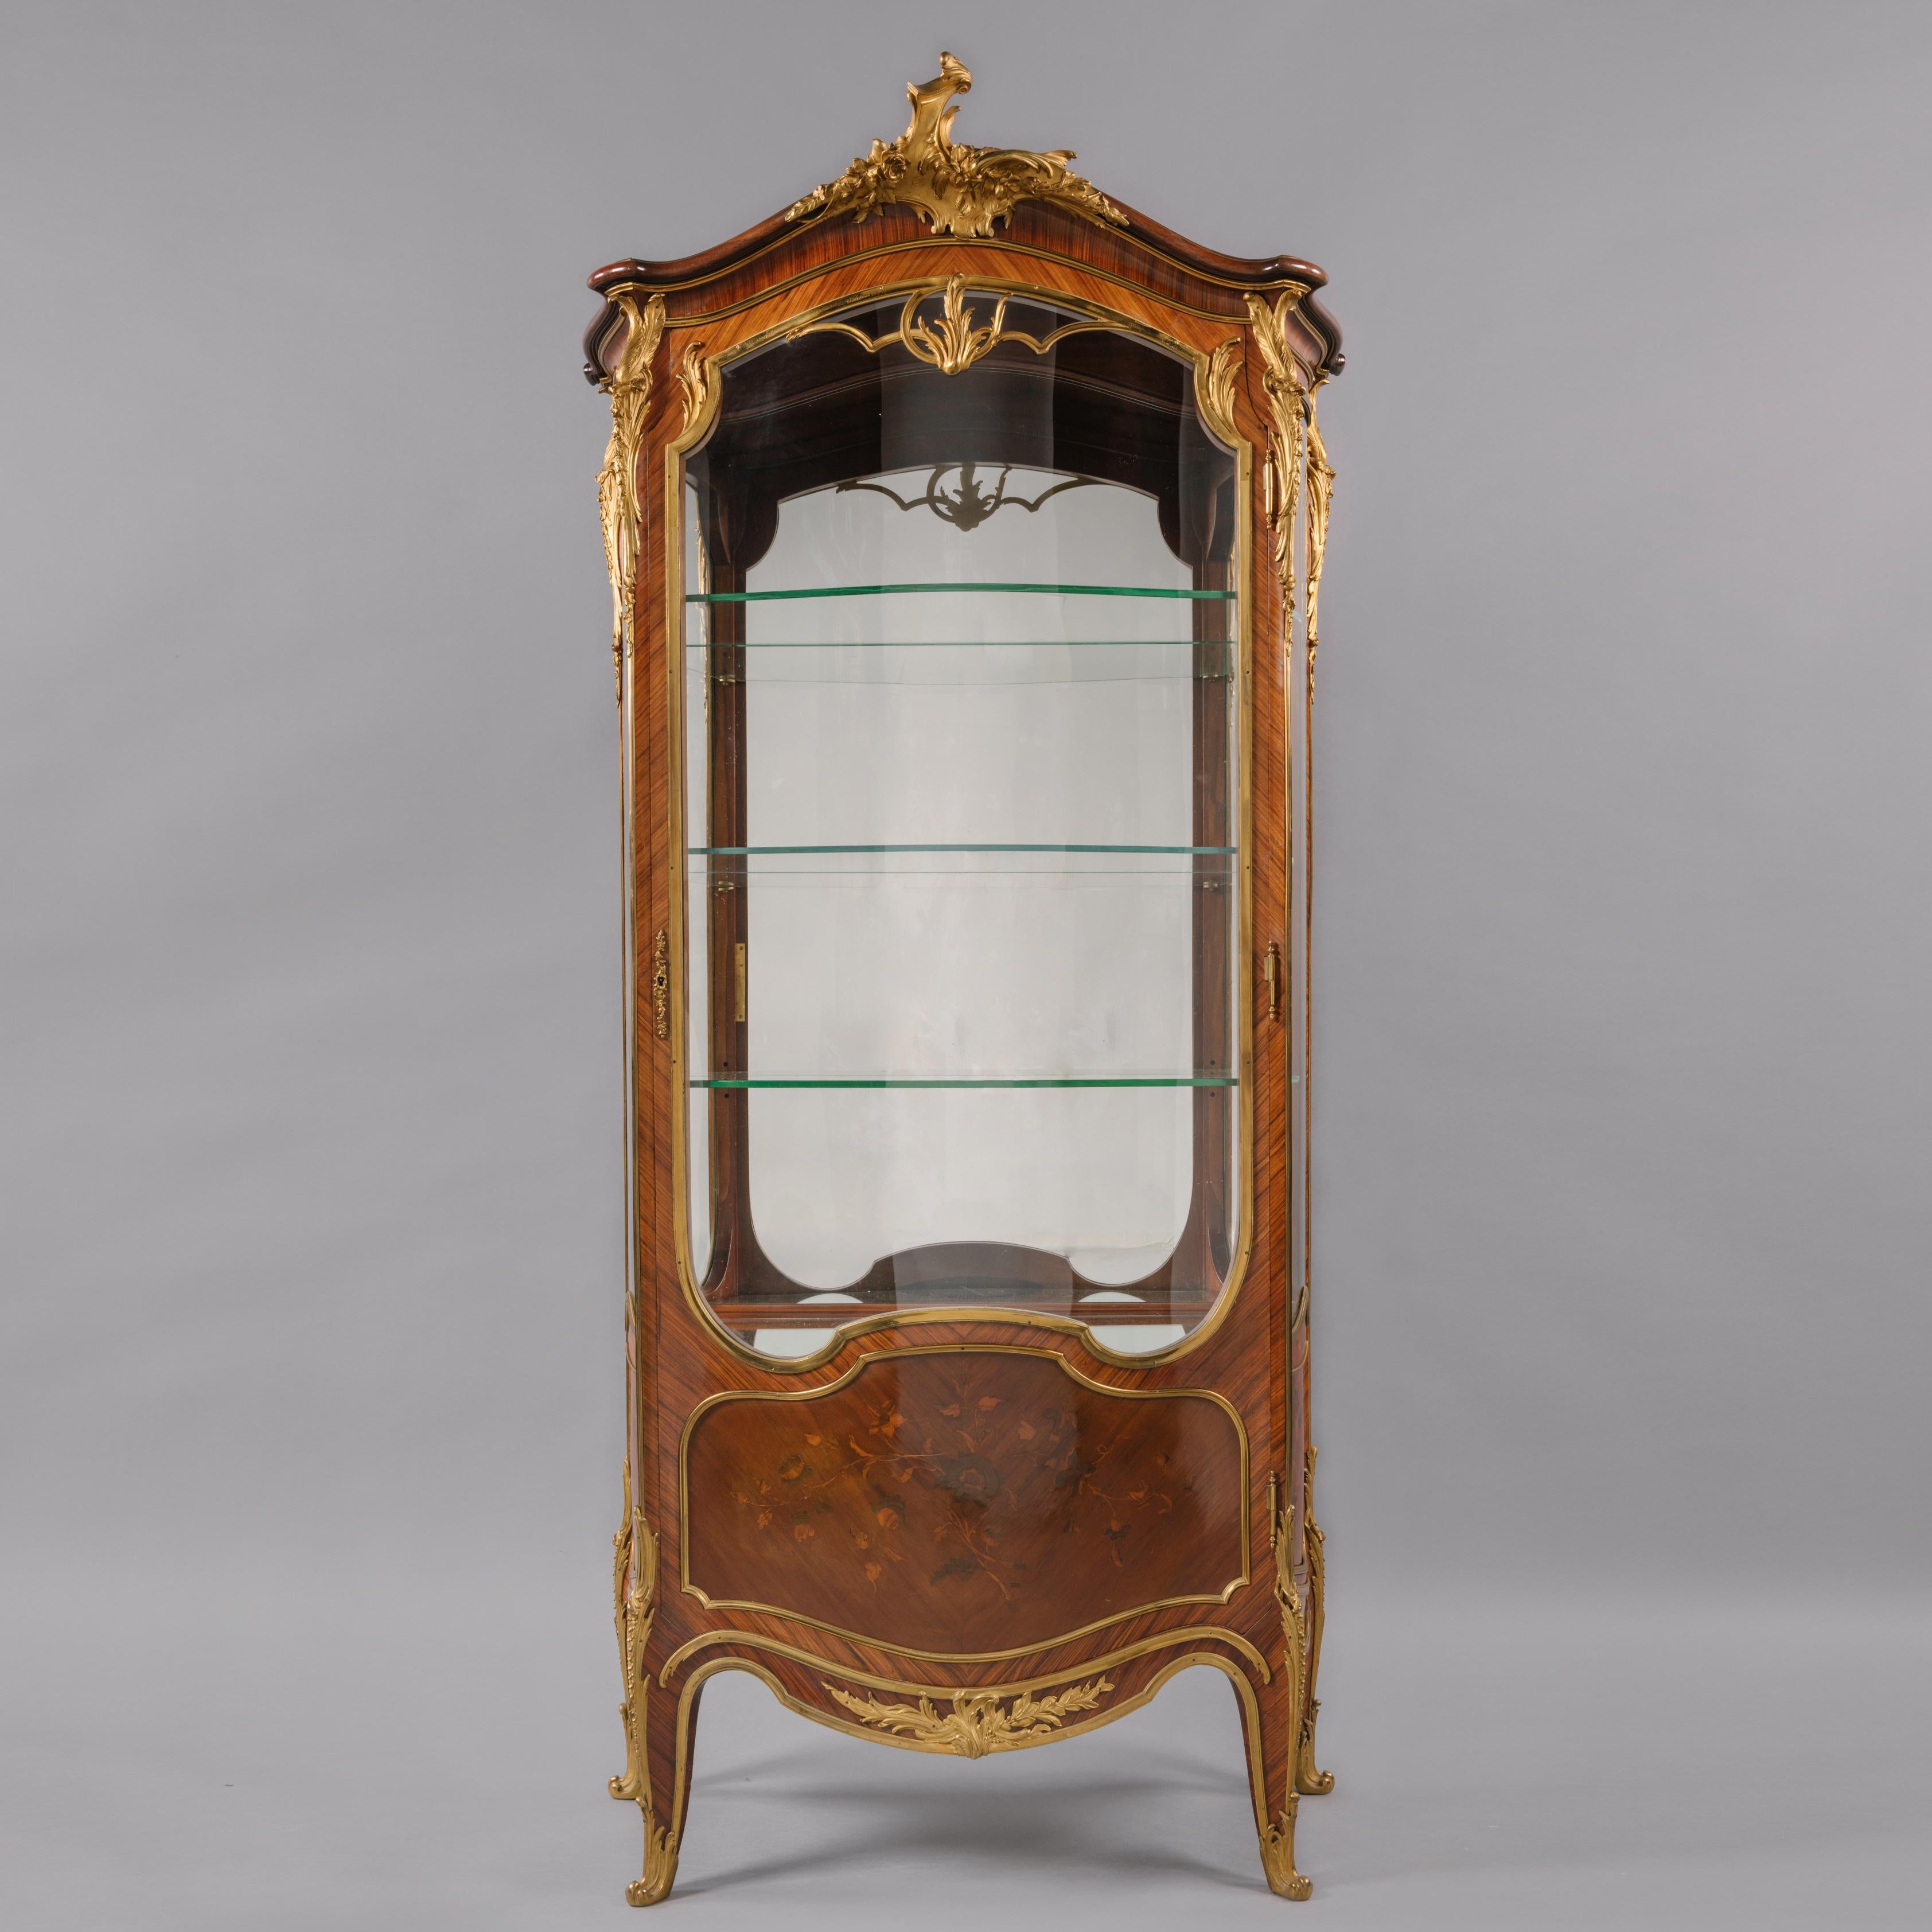 Stenciled to the back ‘Cruyen Paris, Ameublements de style’.

The arched top is centred by a gilt-bronze foliate mount above a shaped glass door to the front, opening to three adjustable glass shelves, with corresponding glazed side panels. Below